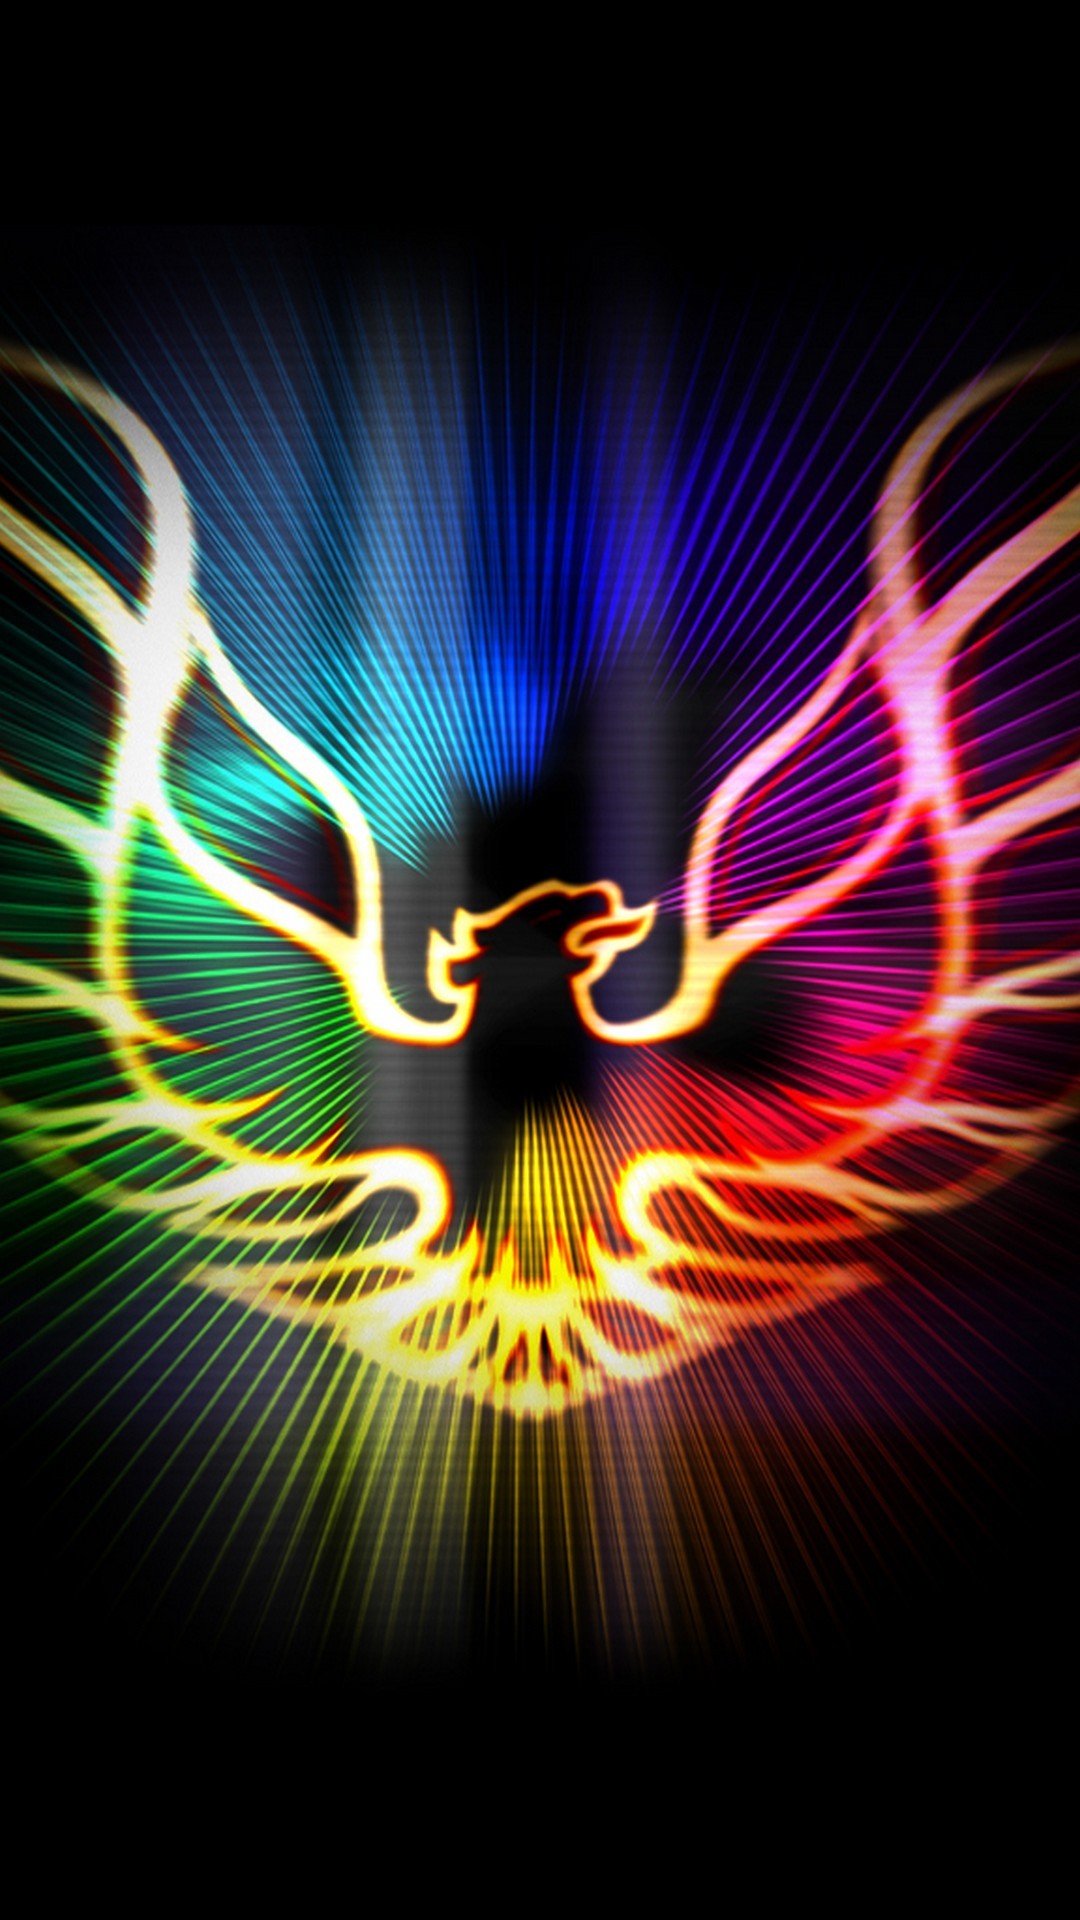 Wallpaper Phoenix Images Android with resolution 1080X1920 pixel. You can make this wallpaper for your Android backgrounds, Tablet, Smartphones Screensavers and Mobile Phone Lock Screen